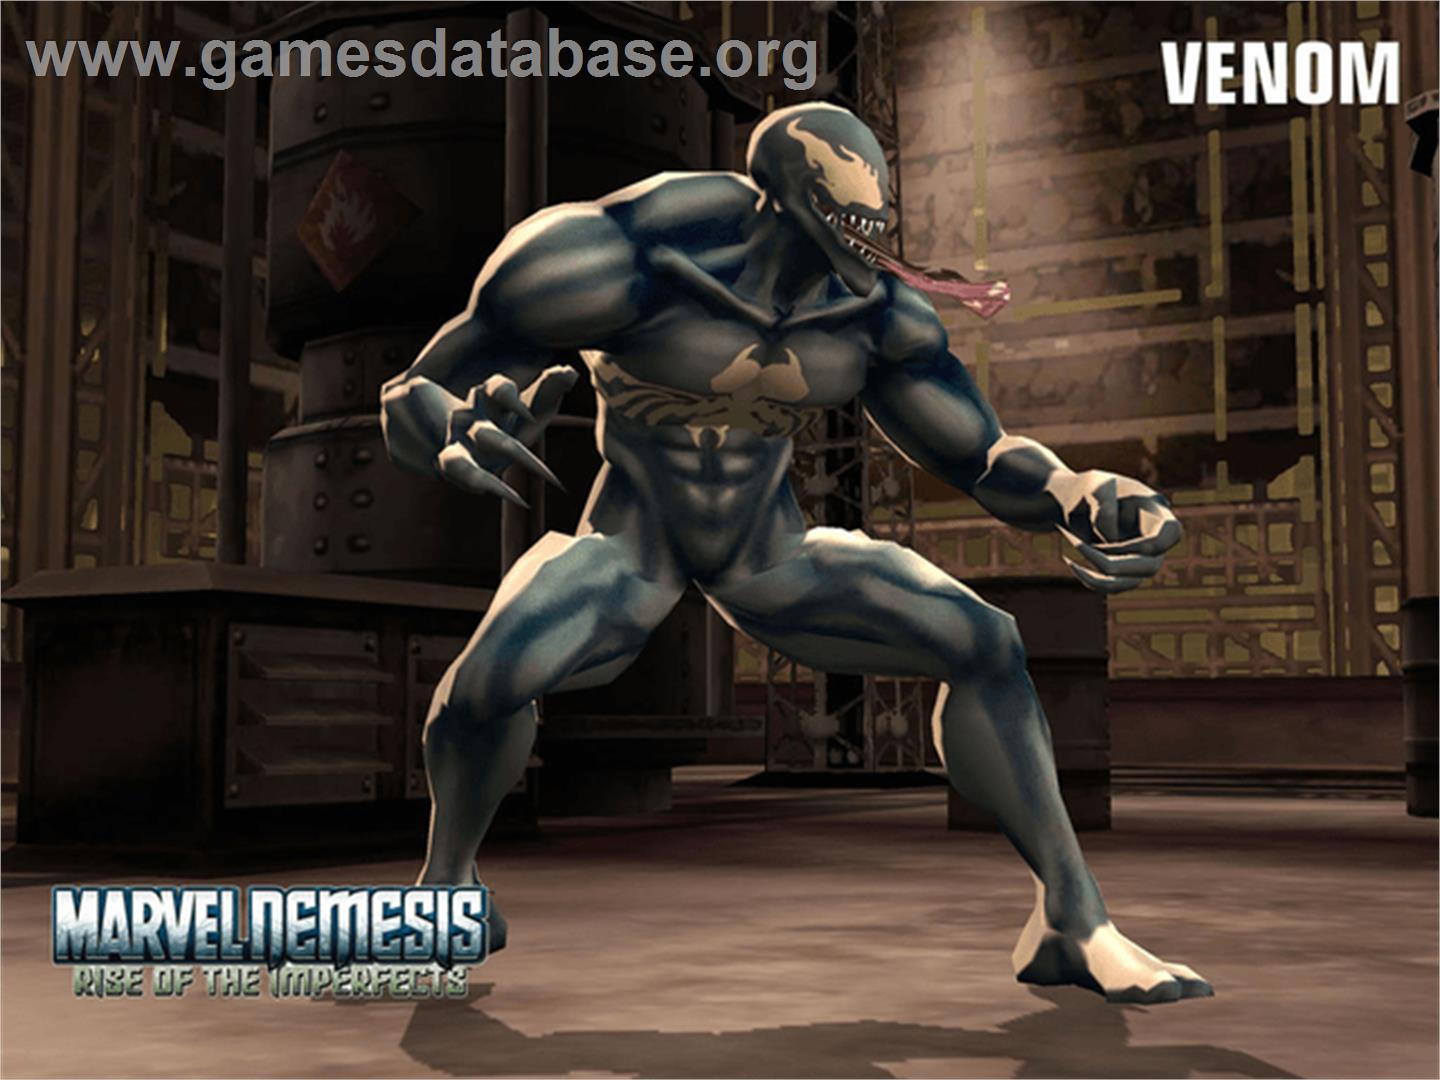 Marvel Nemesis: Rise of the Imperfects - Microsoft Xbox - Artwork - Title Screen